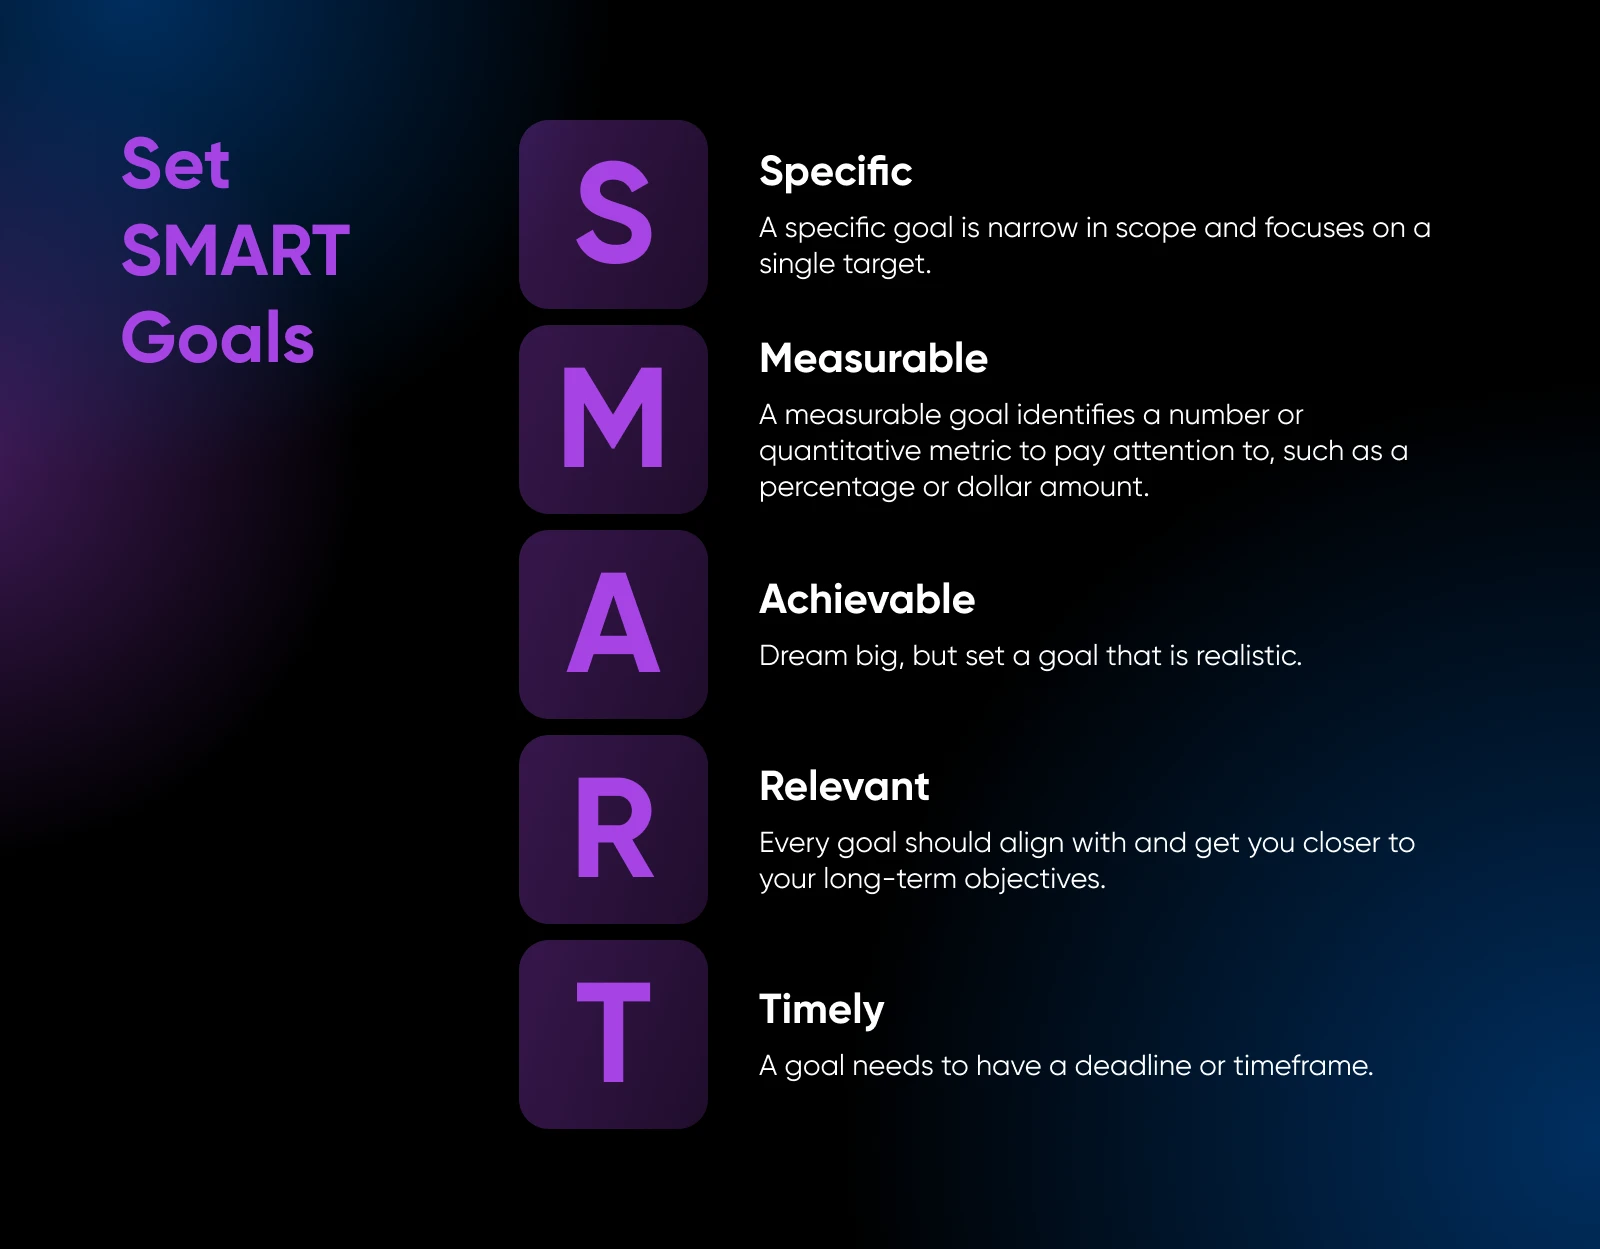 A breakdown of the SMART goal acronym appears in purple against a dark background